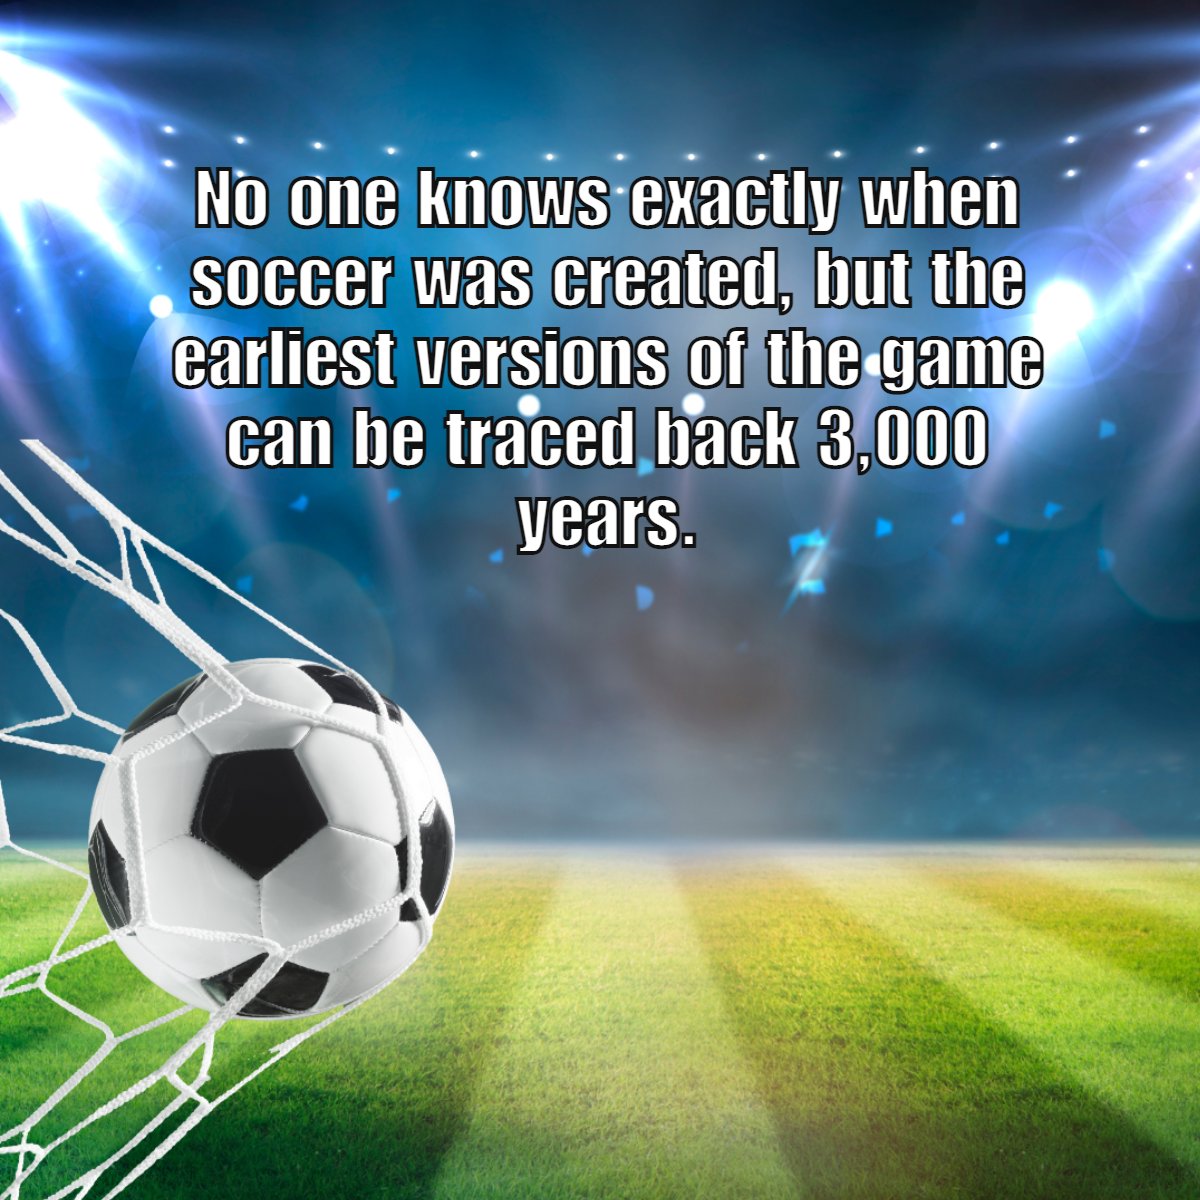 Many civilizations had games that resemble soccer throughout history!

However, modern soccer as we know it is often attributed to the English. 

#soccerfacts   #funfact   #didyouknowfacts 
#yourspacecoastbroker #yourspacecoastagents #movetoflorida #brevardrealestate